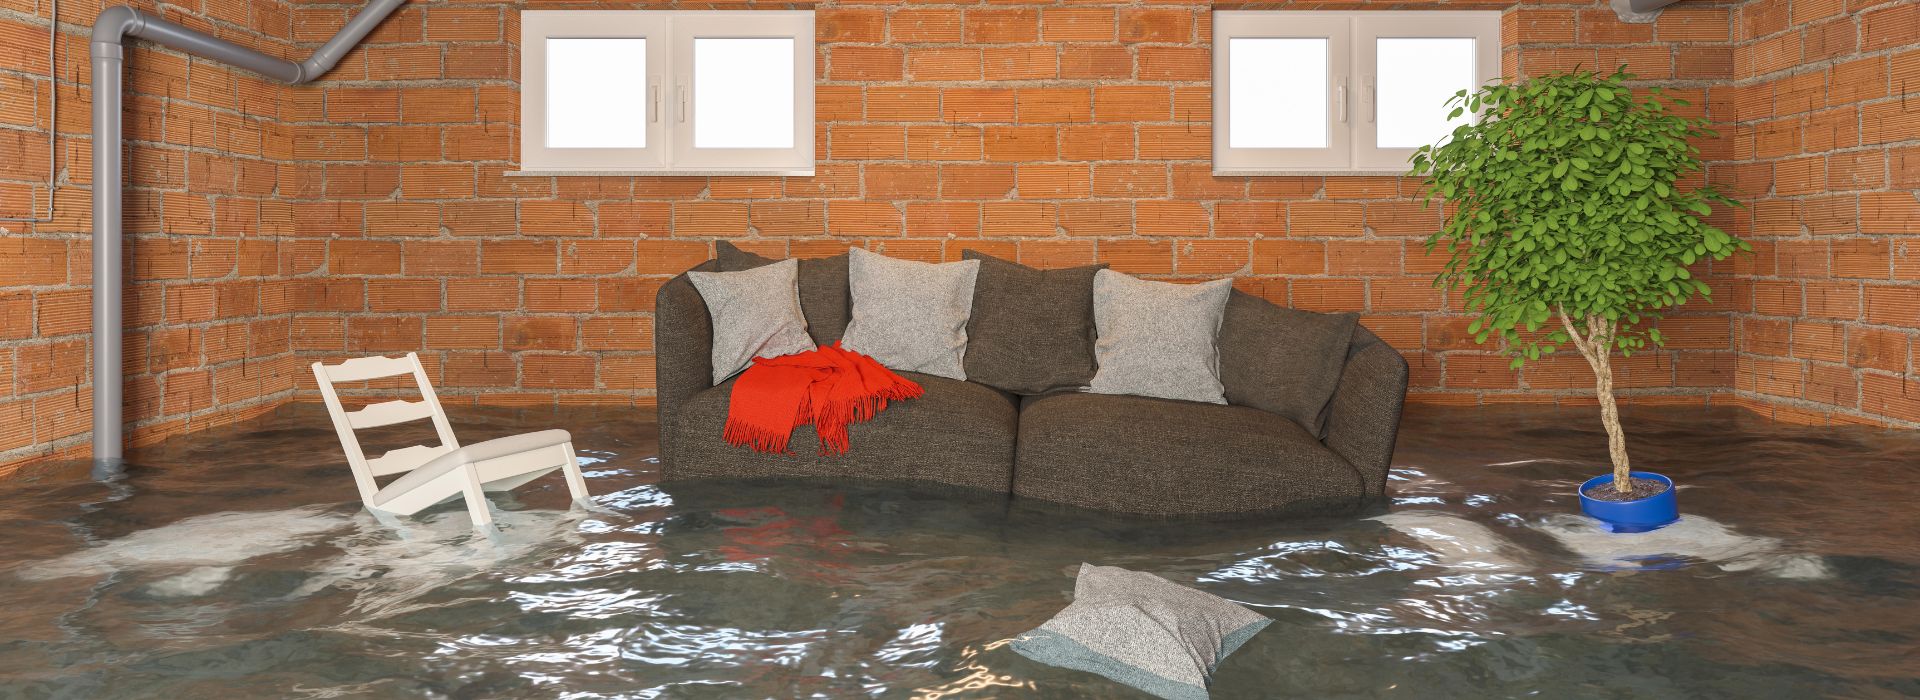 How to Clean Up After a Flood In 15 Easy Steps